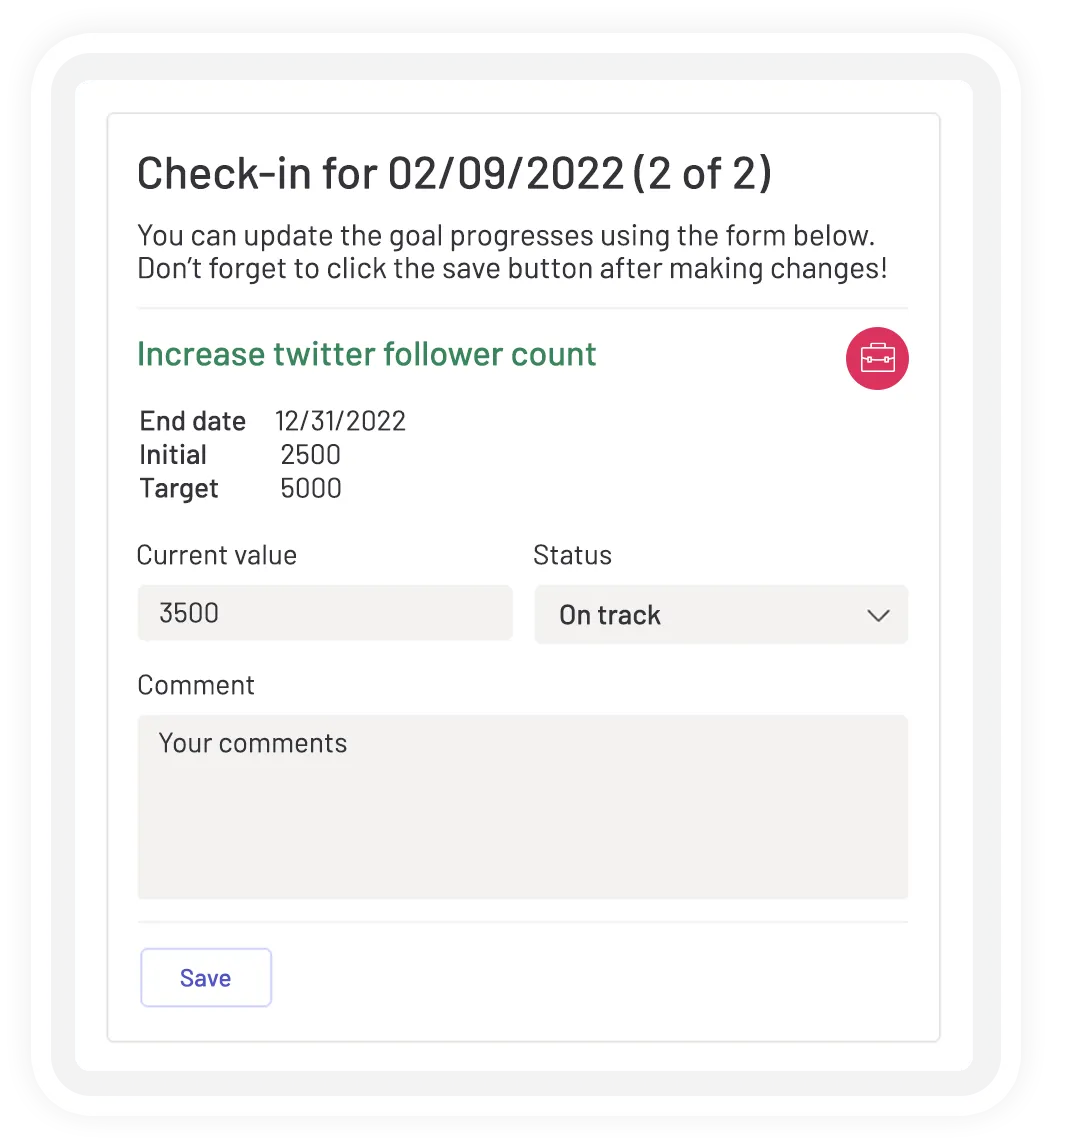 teamflect goal okr check-in form in Microsoft Teams